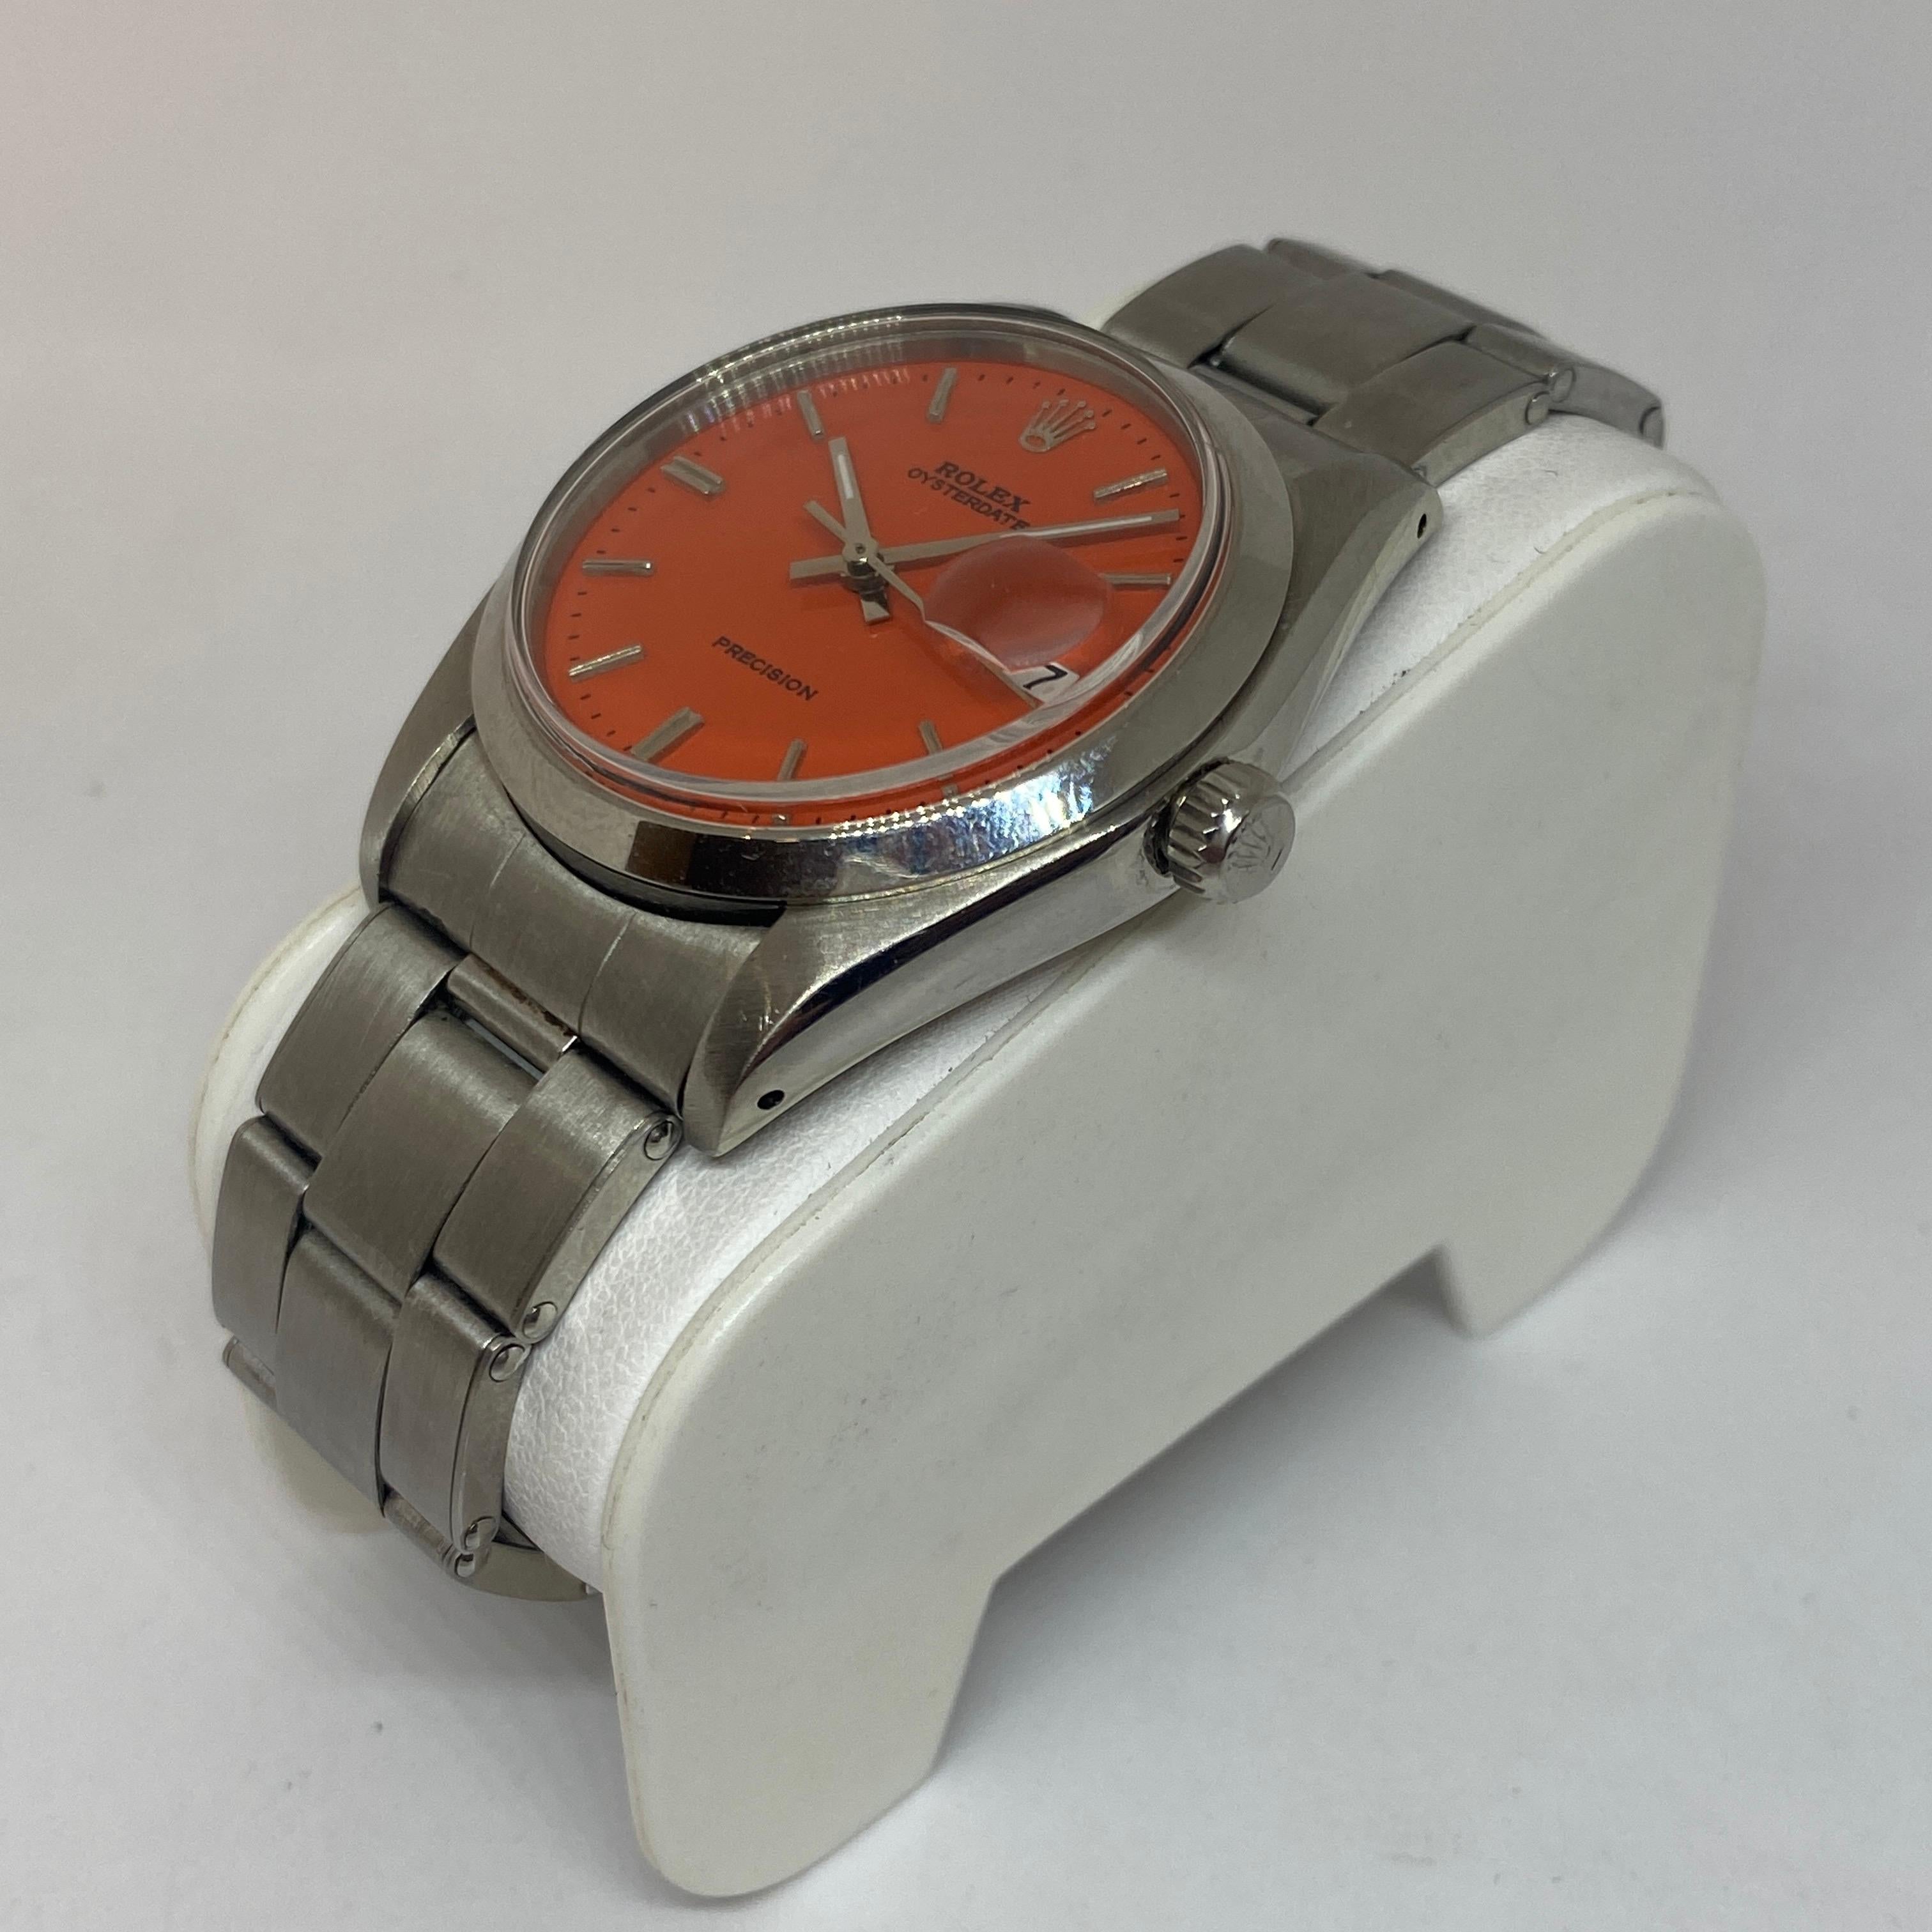 Pre-owned Rolex Oysterdate Precision timepiece designed in stainless steel, 35mm with an orange SR dial, oyster link bracelet, automatic movement and one year warranty included. The watch measures 8